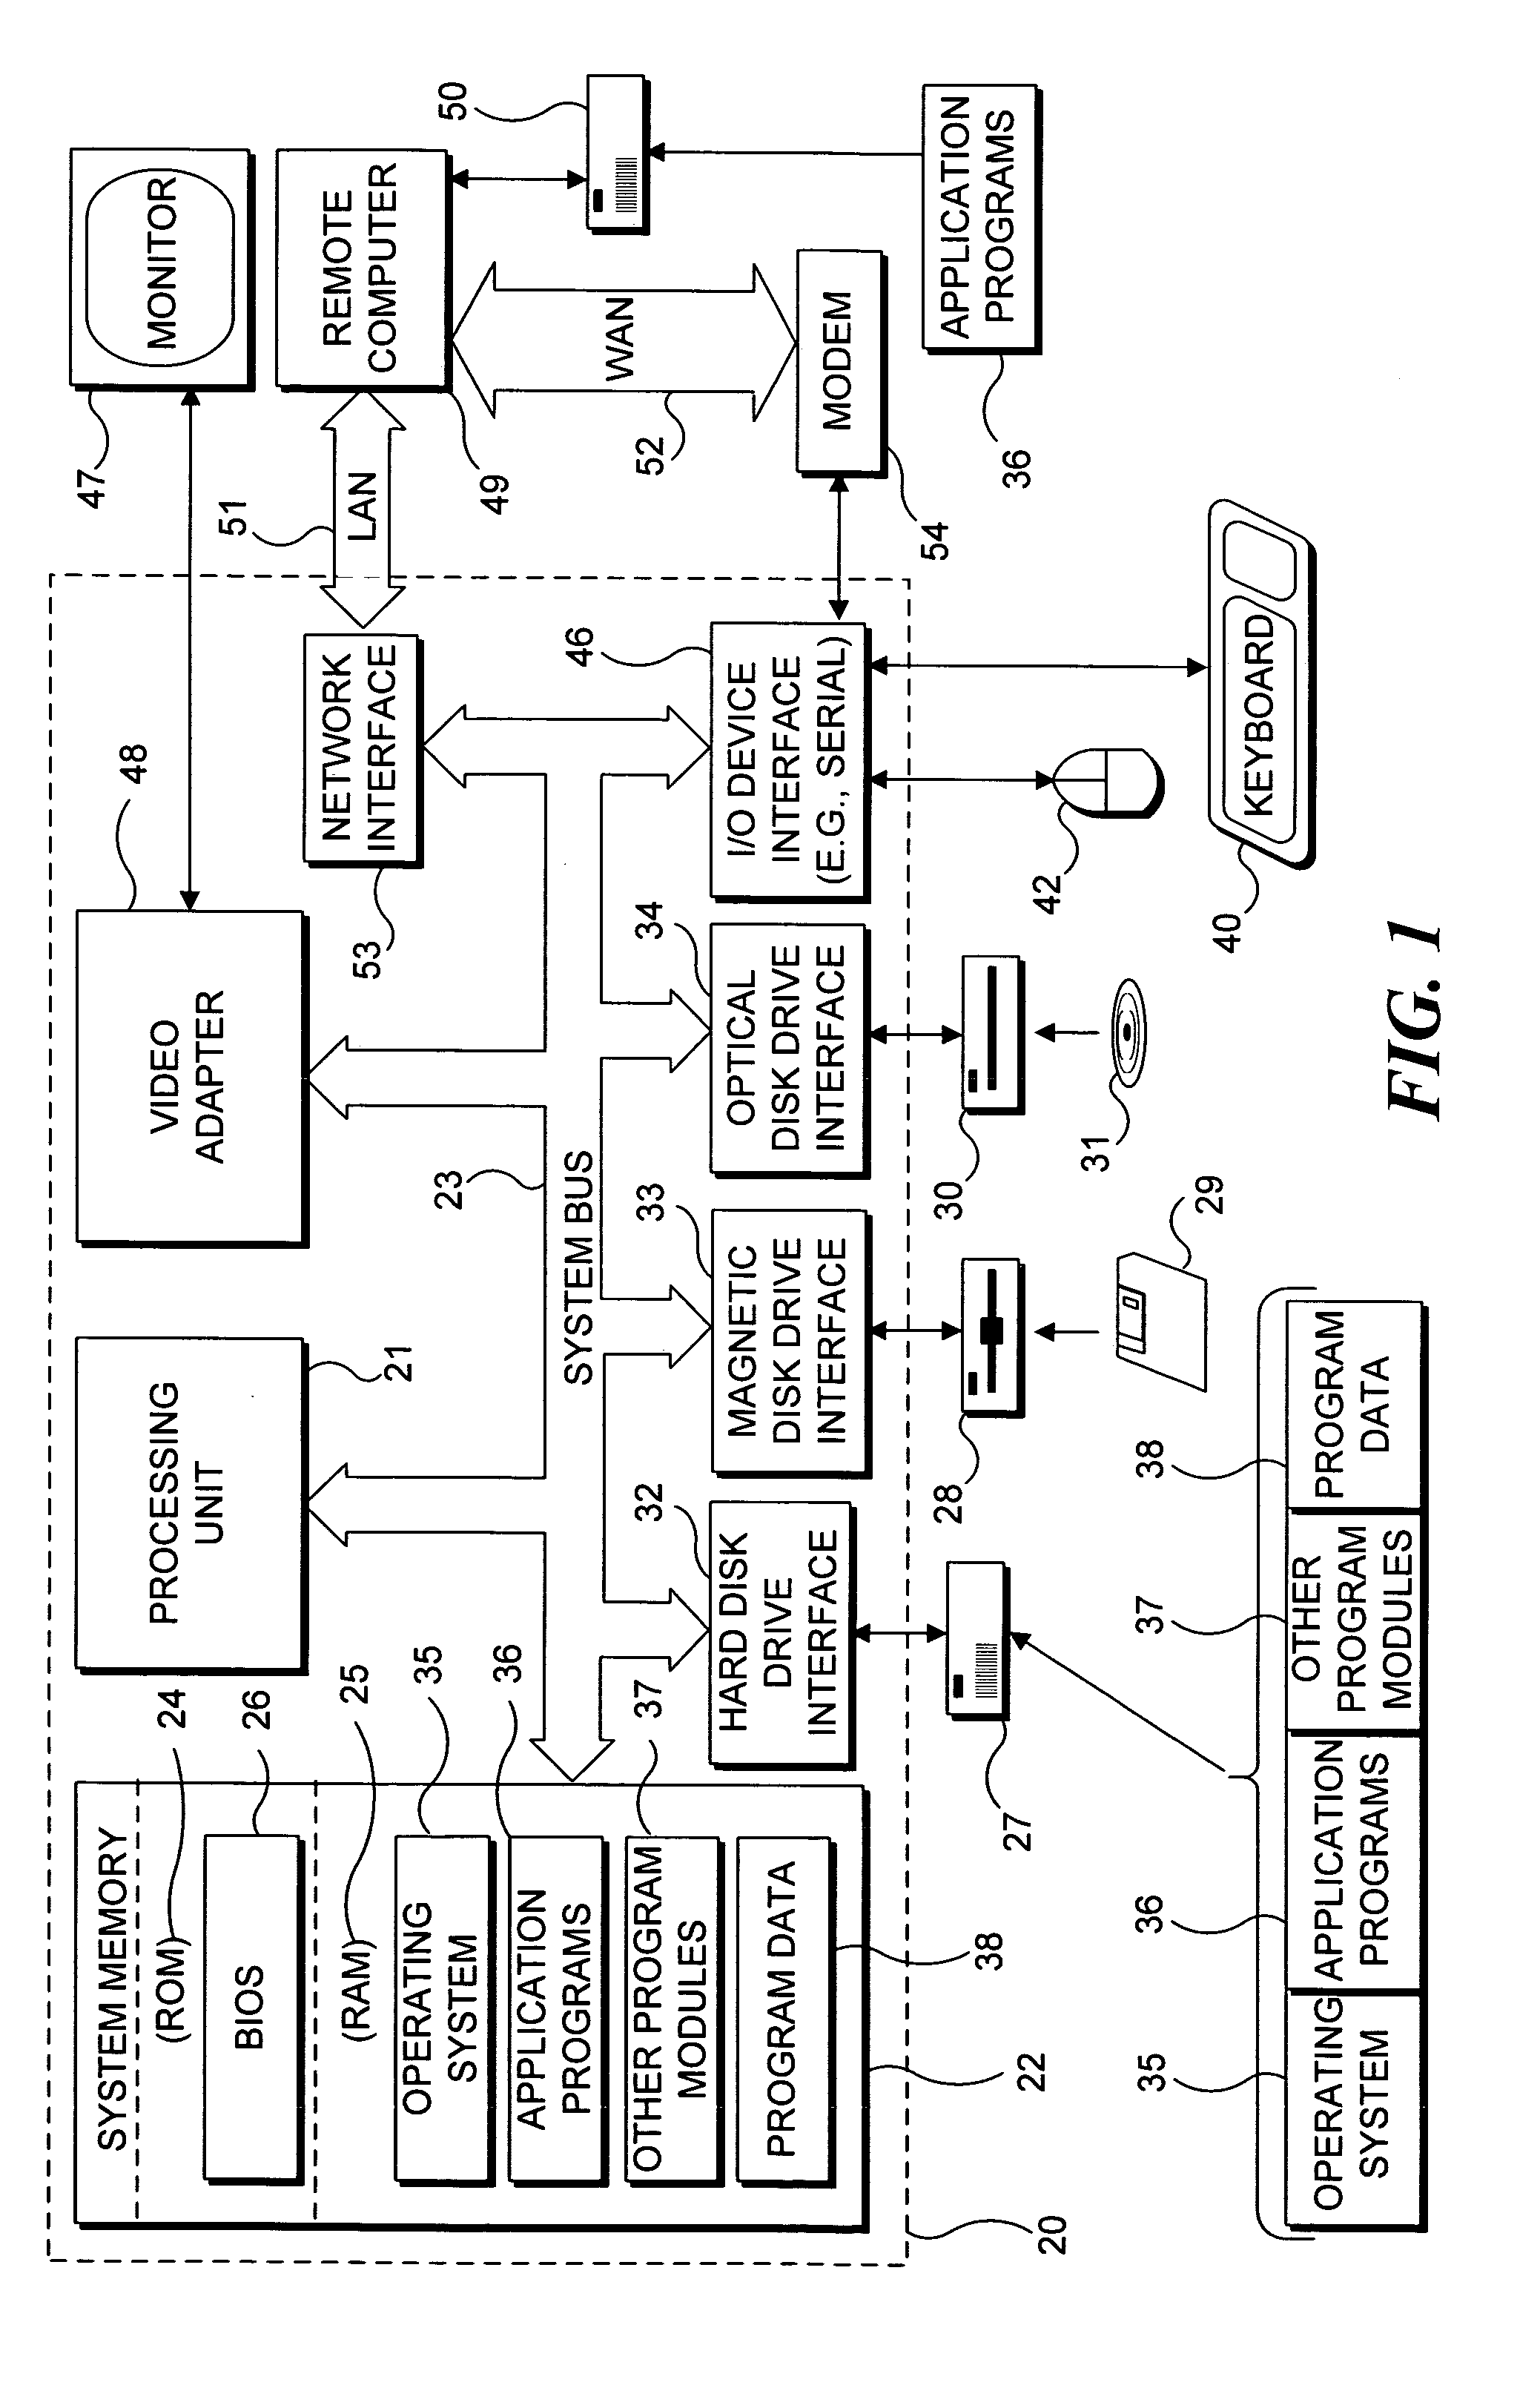 Using a physical object to control an attribute of an interactive display application